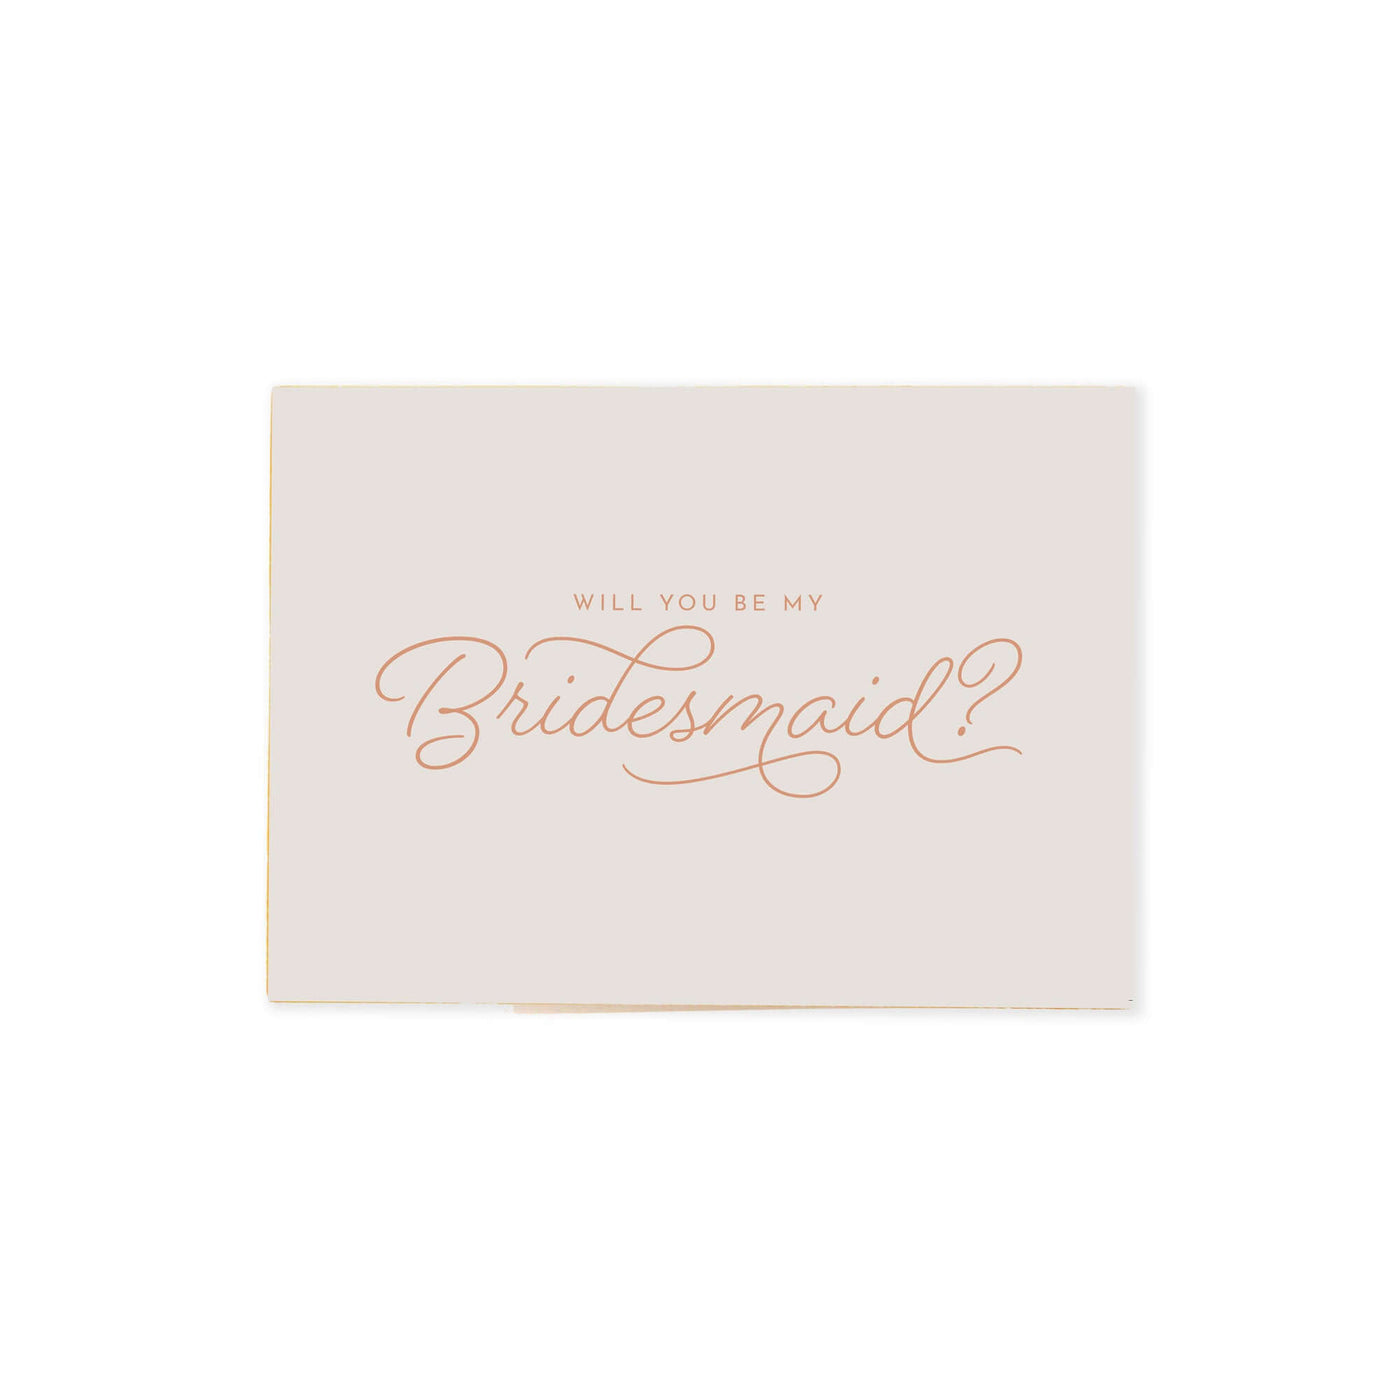 cream colored Be my bridesmaid proposal card that reads "will you be my bridesmaid?" in neutral orange cursive font.